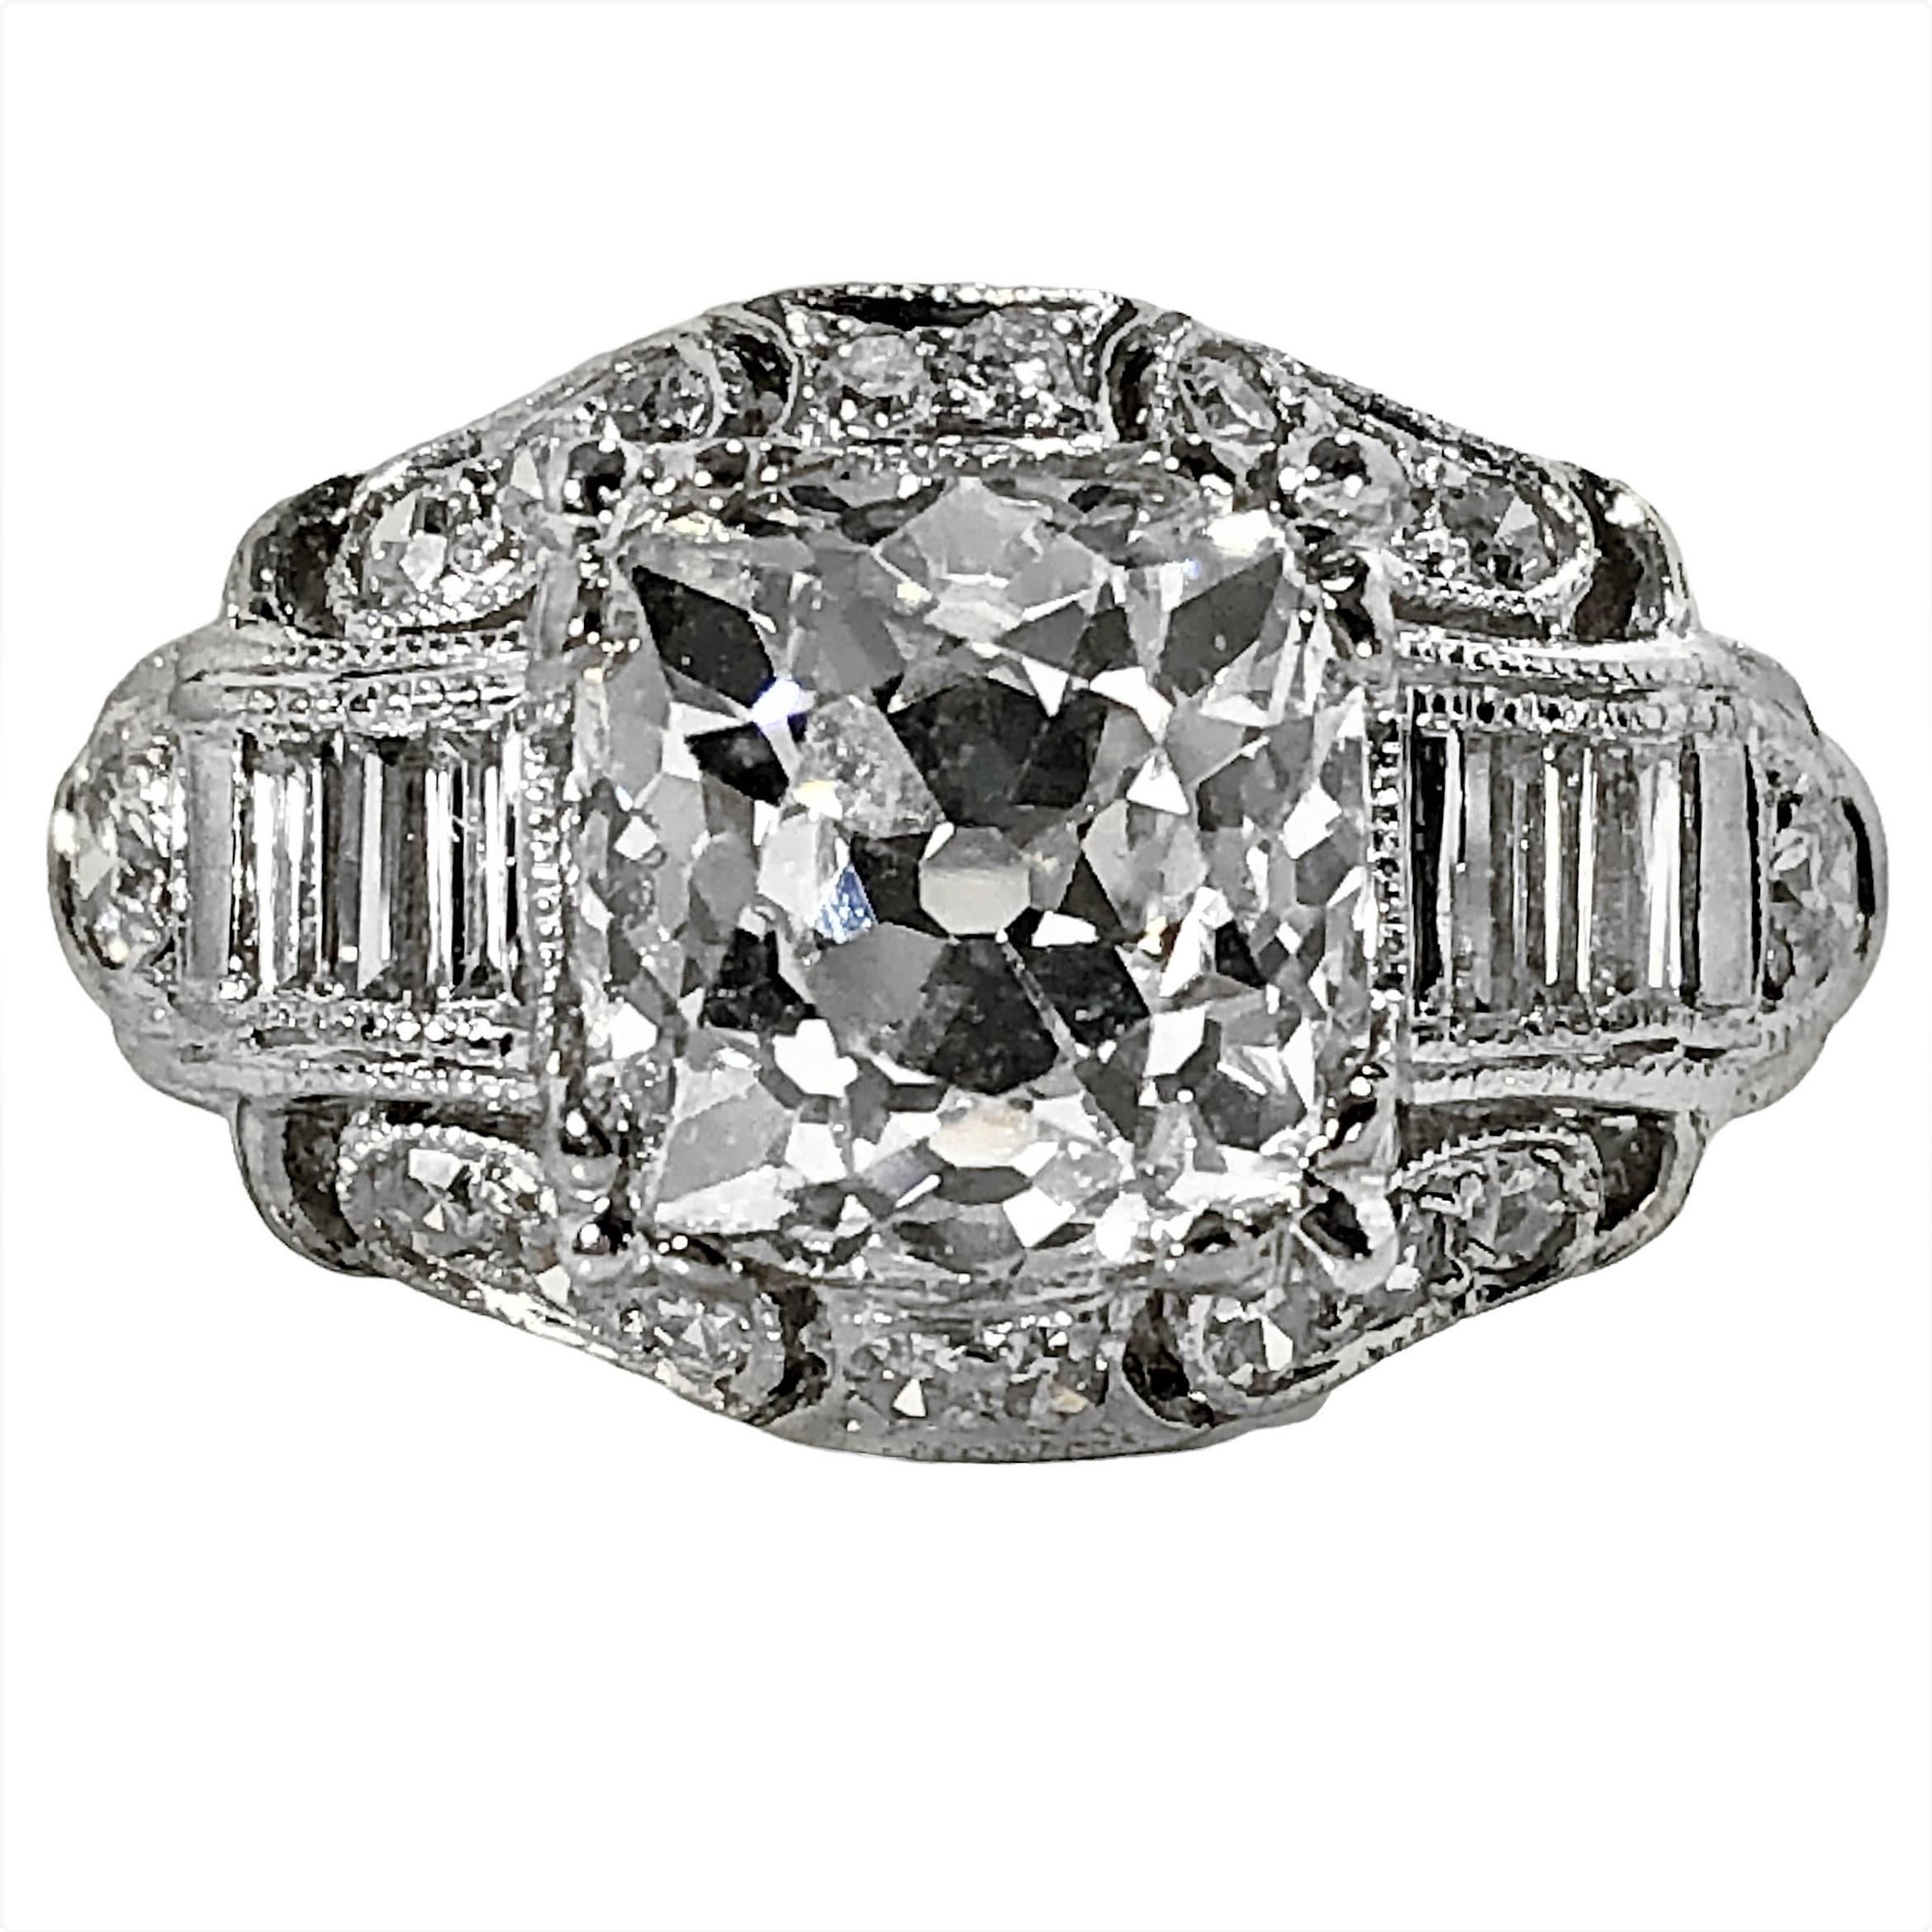 This wonderful and excellently preserved original Art-Deco creation is outstanding in appearance and in quality. Crafted in platinum almost 100 years ago, it is set with one very symmetrical antique cushion cut diamond weighing exactly 2.98ct, and